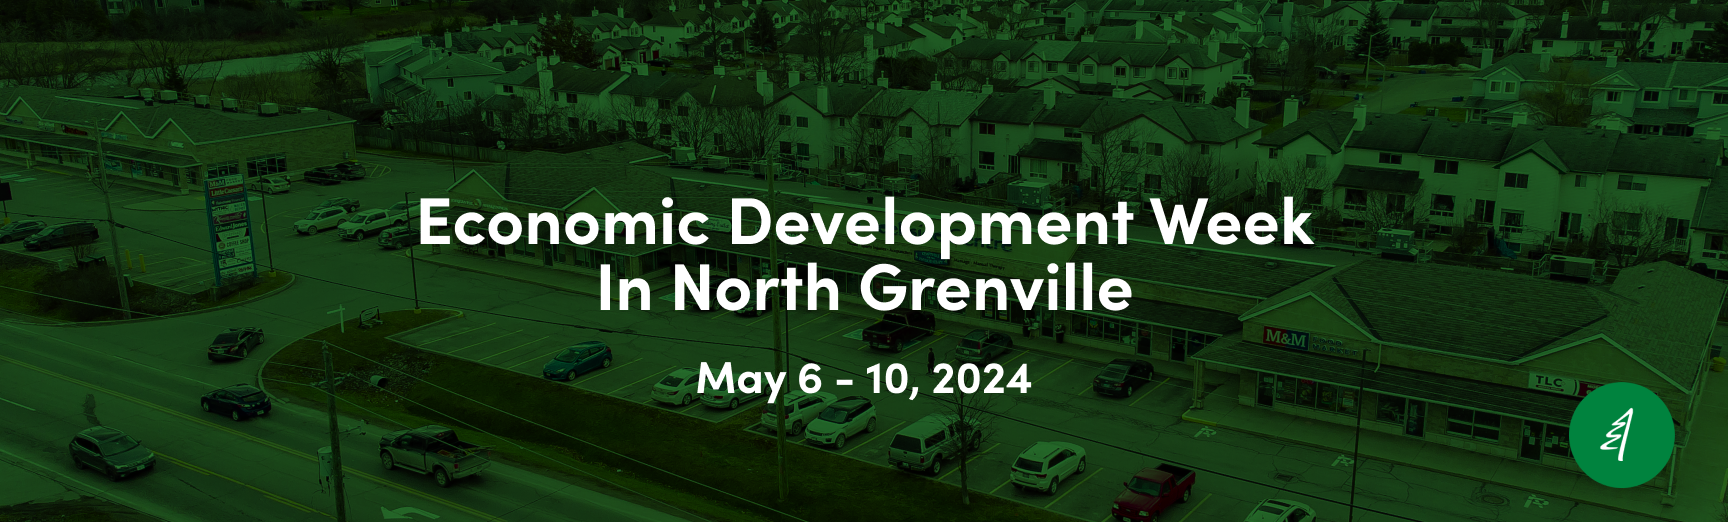  Economic Development Week in North Grenville. May 6th - 10th, 2024.